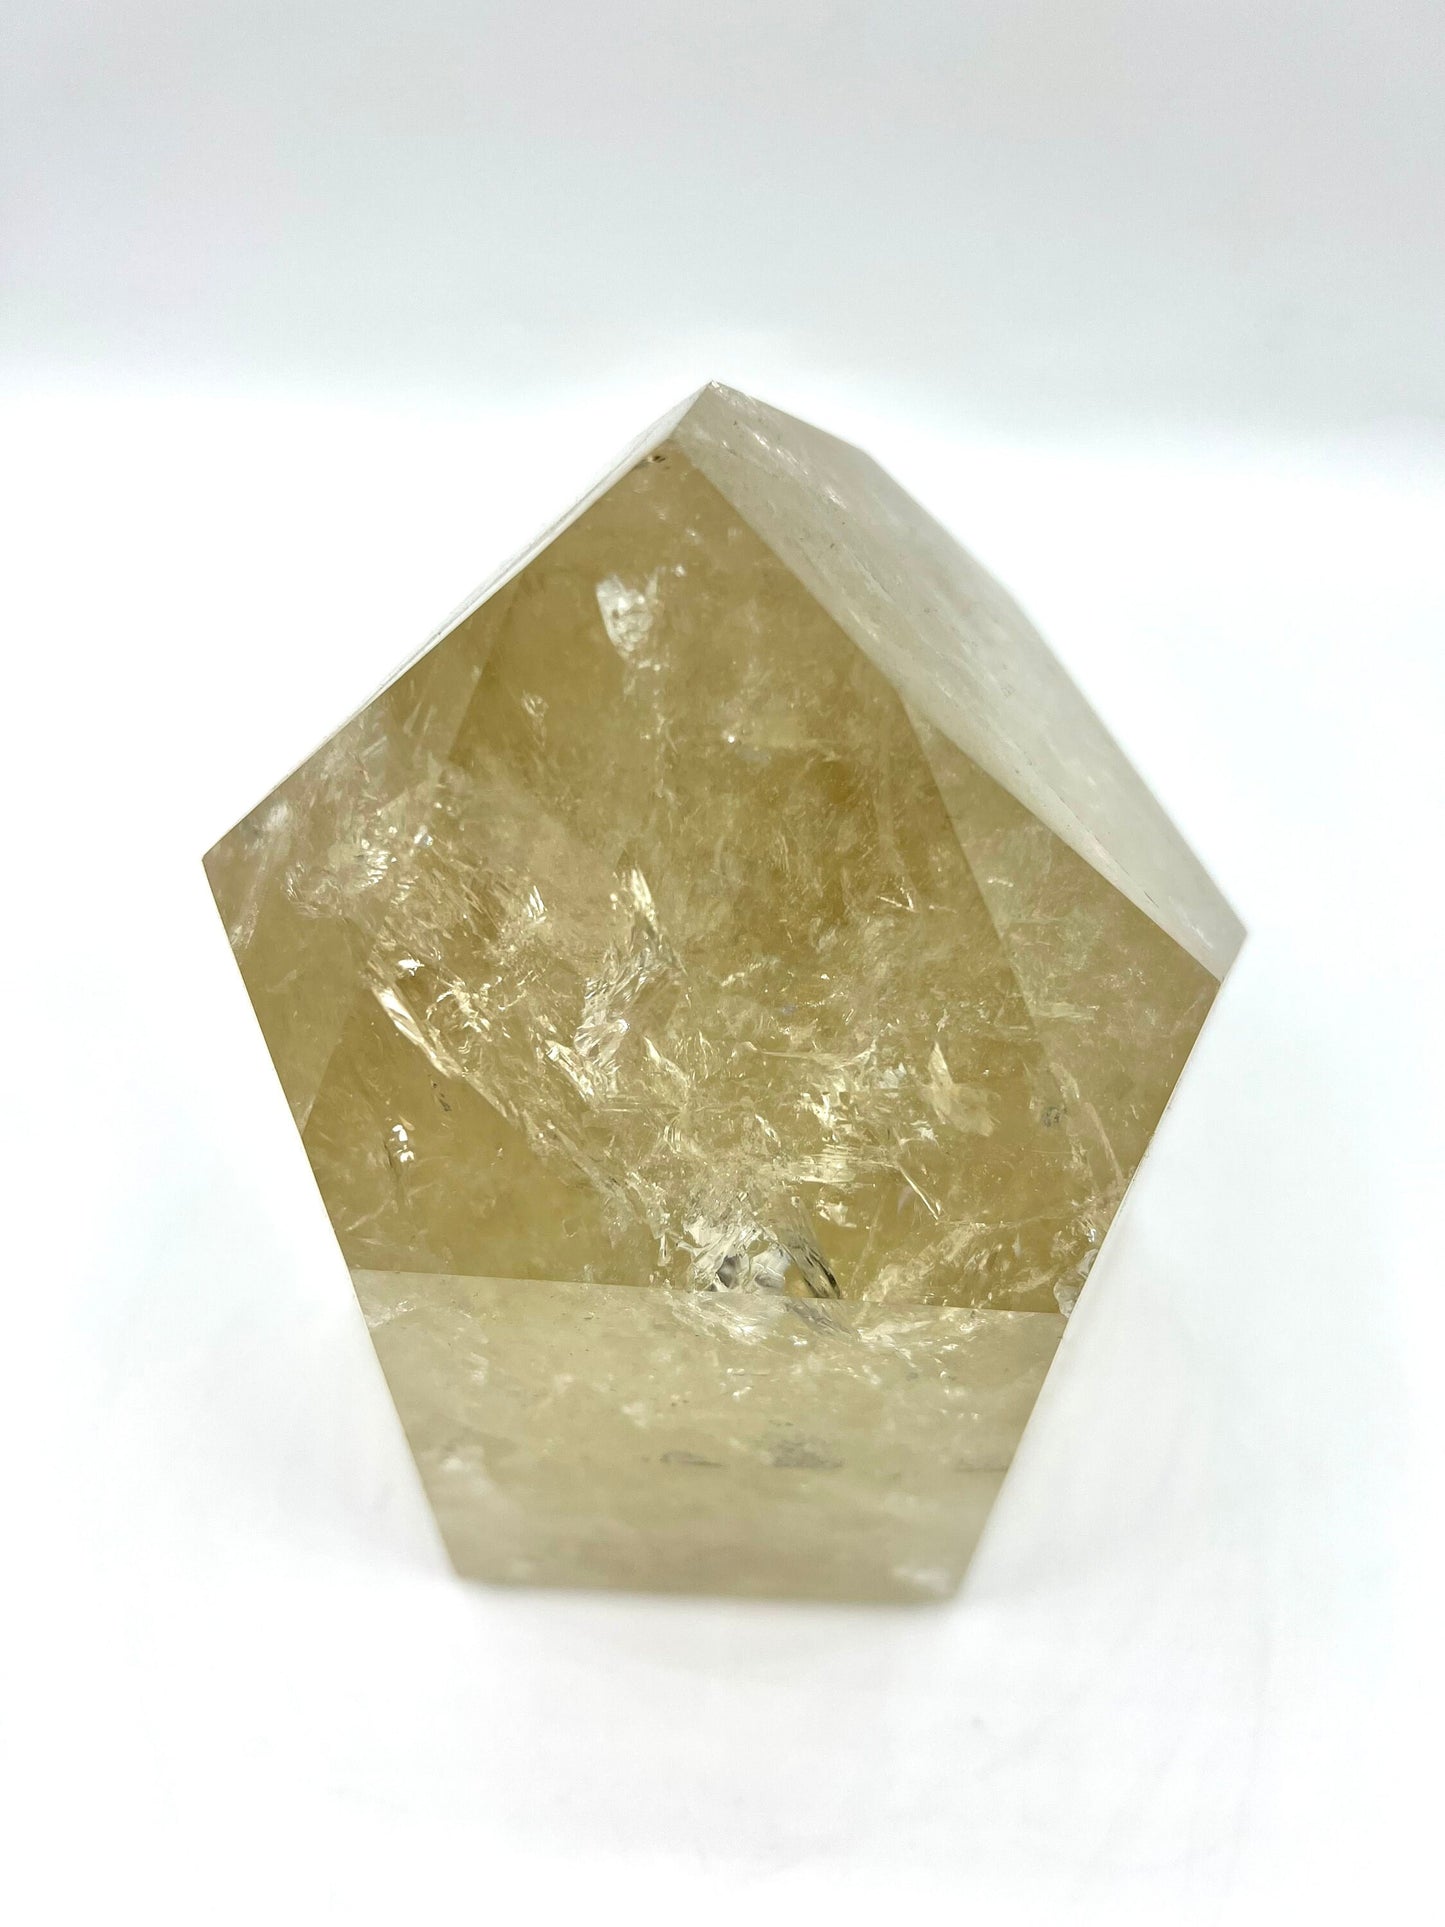 7.2lb  Large Standing Clear Quartz Crystal Tabletop Huge Healing Stone Home decor 6.5" tall